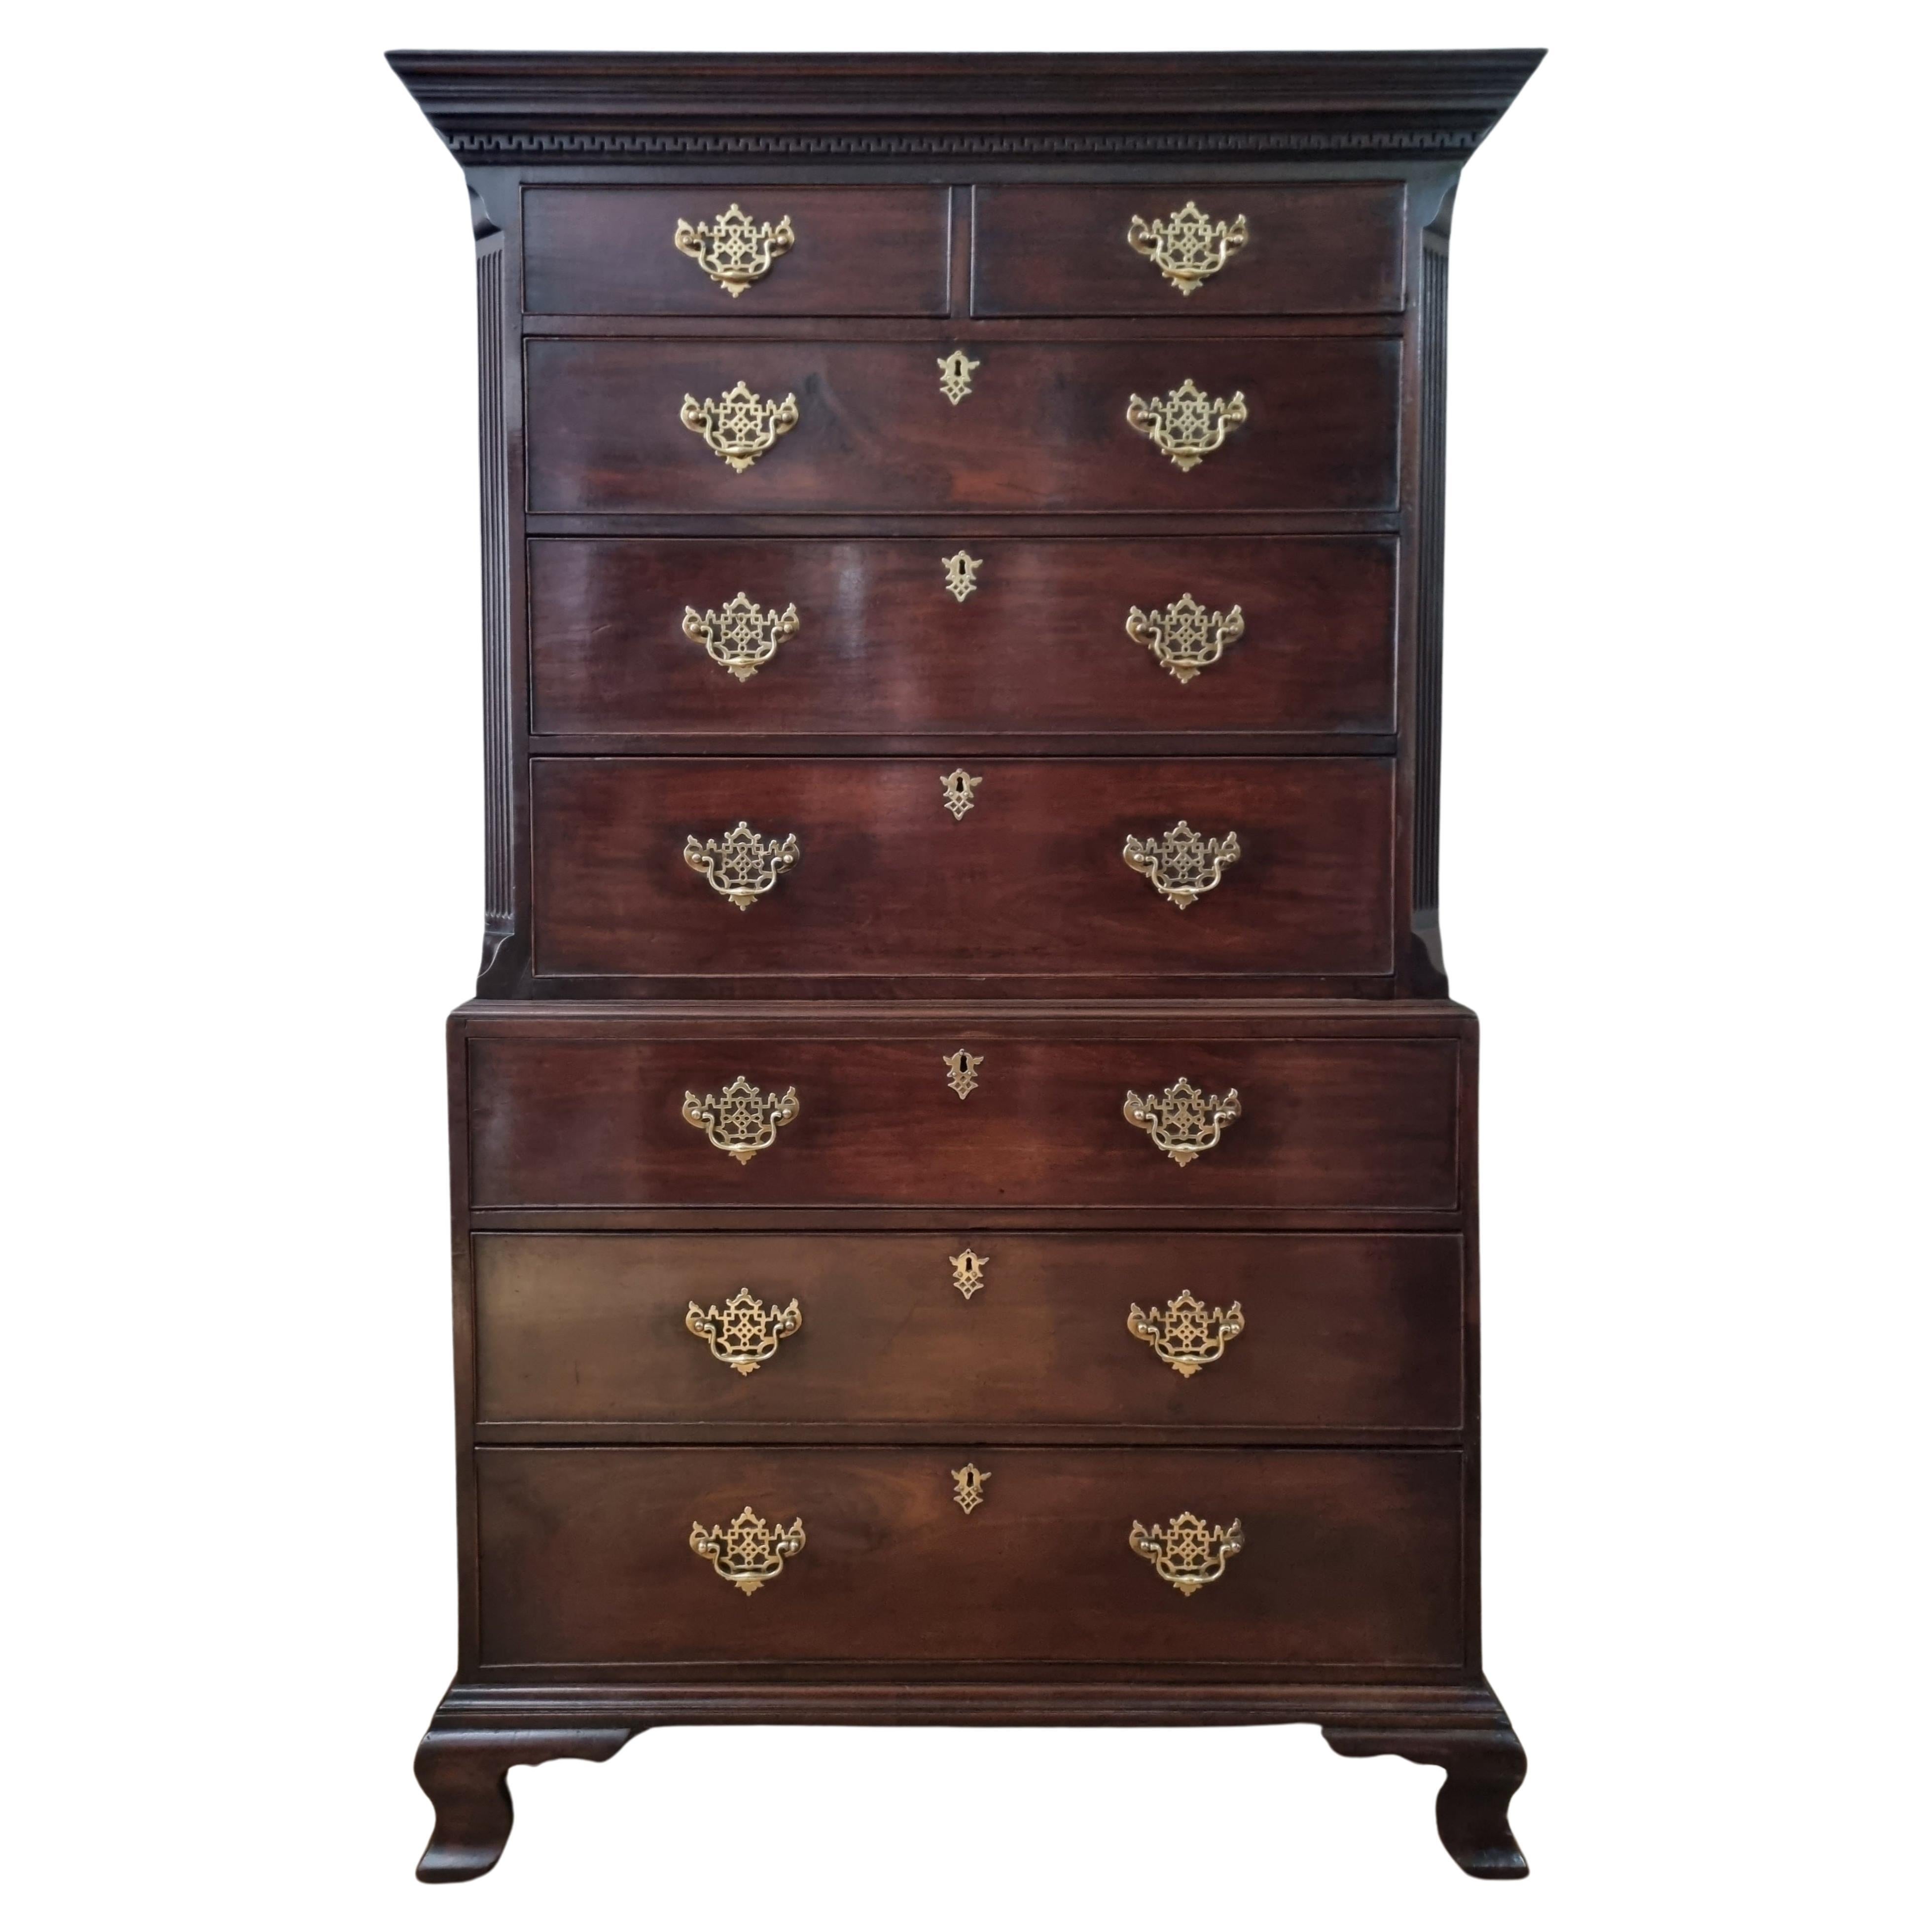  George III Figured Mahogany Tallboy Chest on Chest Circa 1760s For Sale